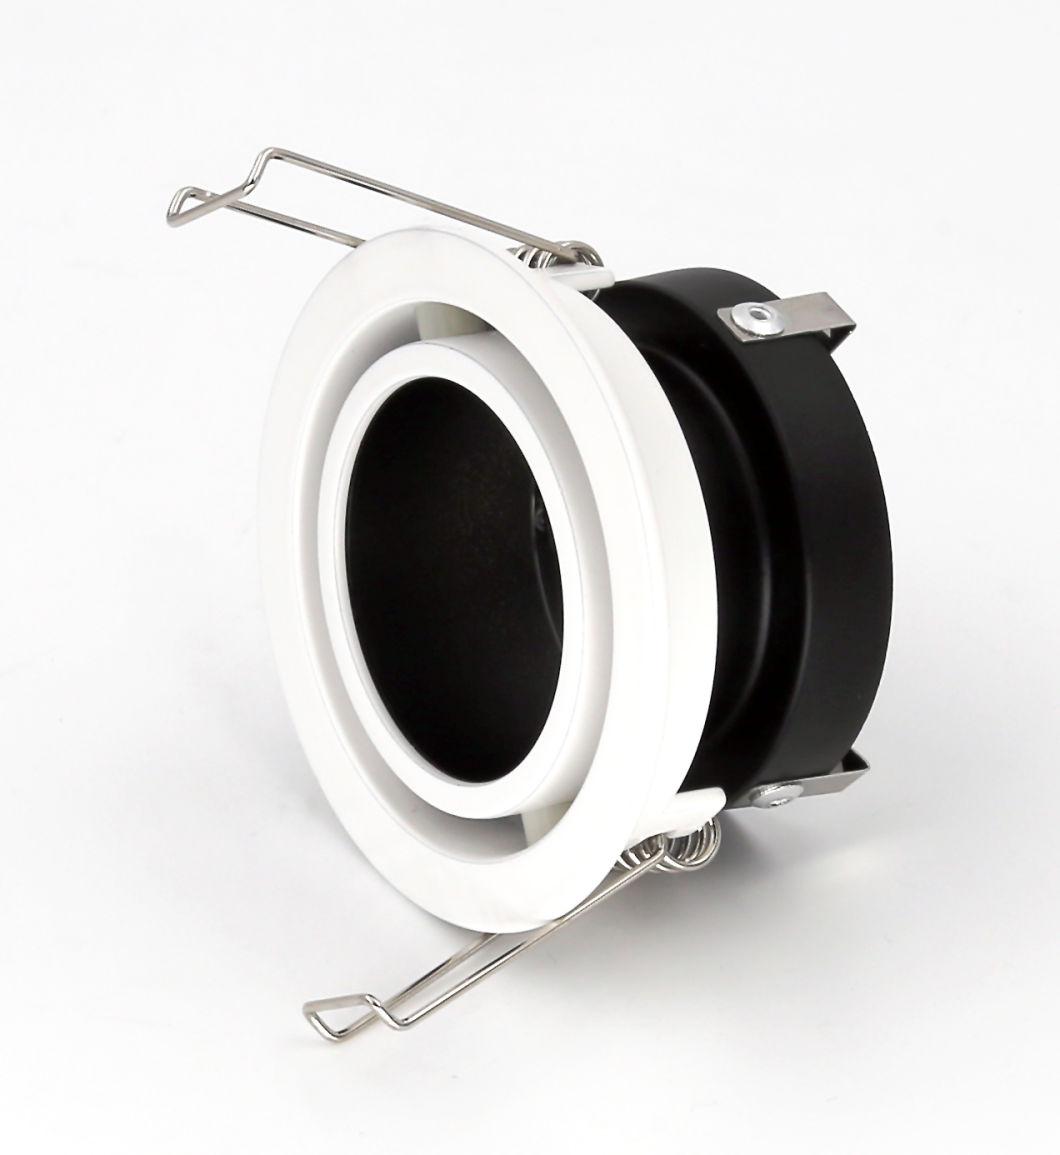 White-Black Adjustable Recessed Downlight Fixture Mounting Ring for Module